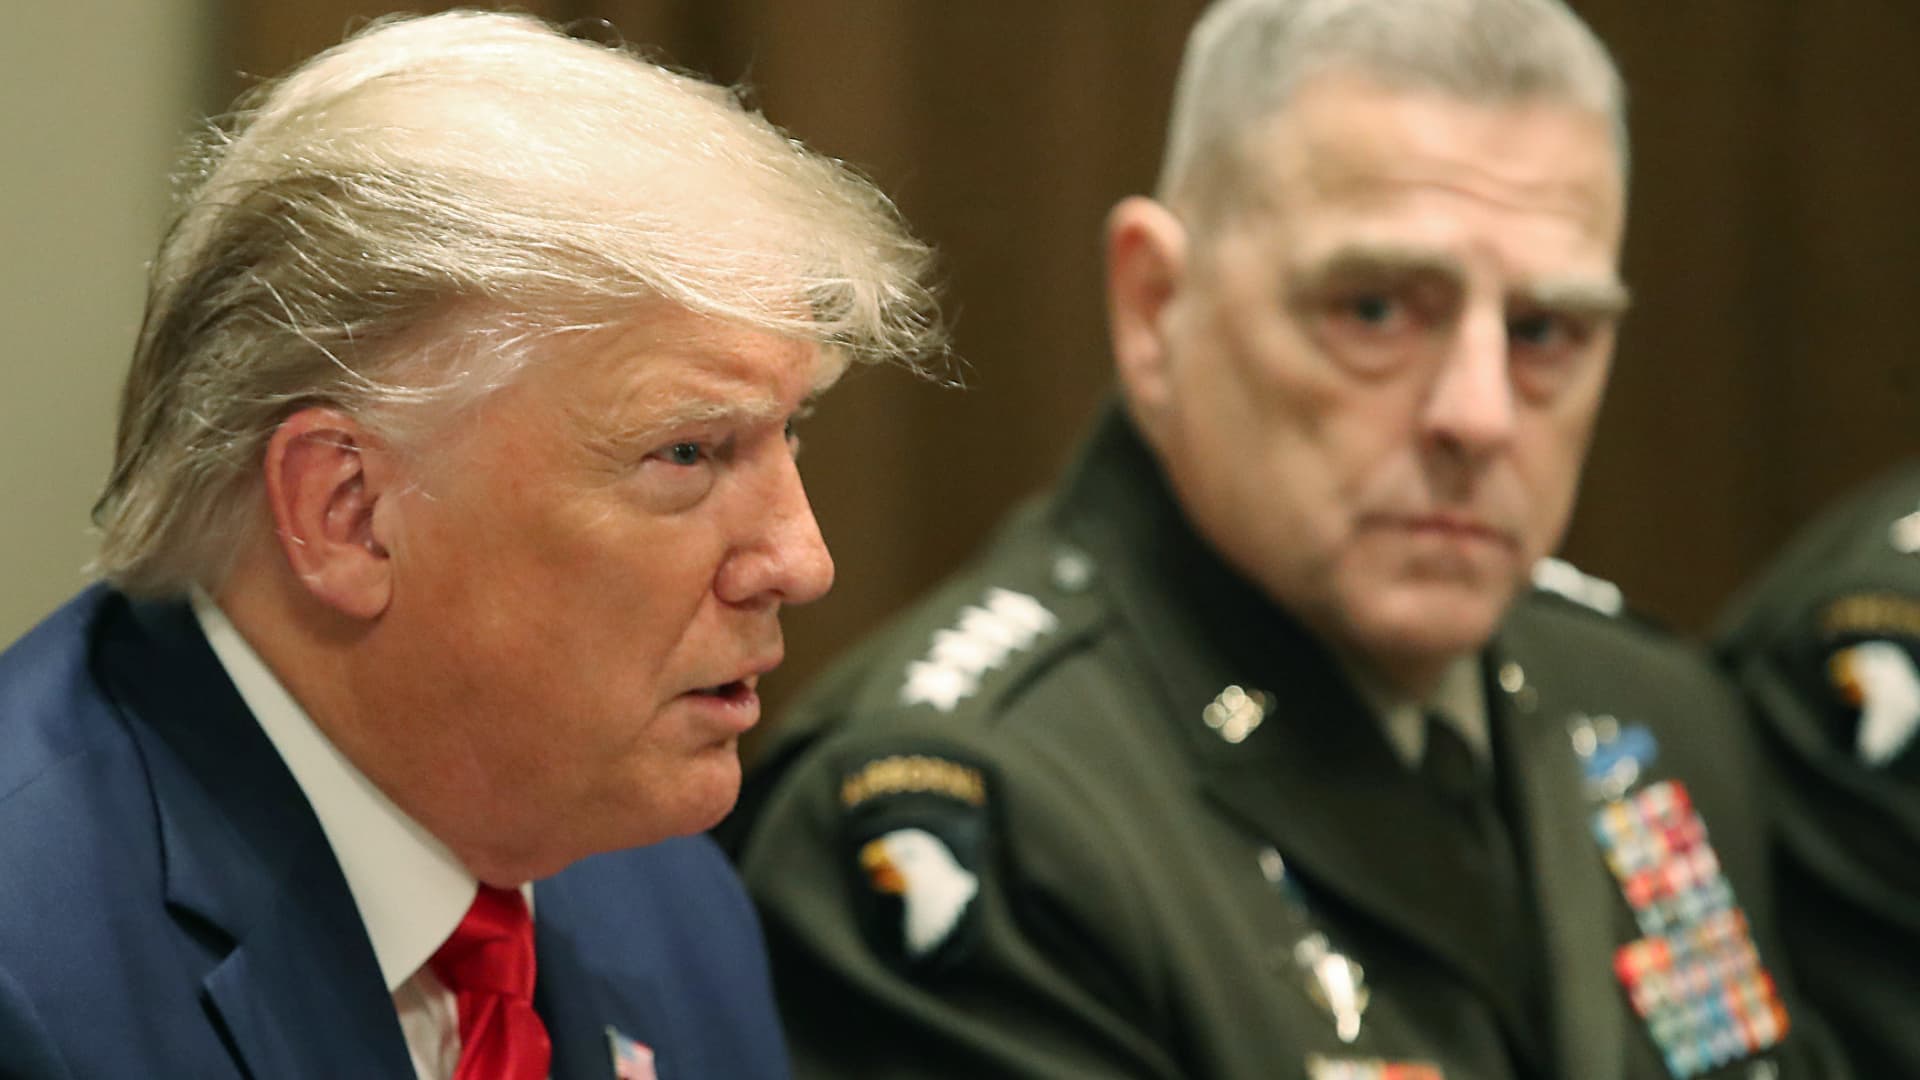 President Donald Trump speaks as Joint Chiefs of Staff Chairman, Army Gen. Mark Milley looks on after getting a briefing from senior military leaders in the Cabinet Room at the White House on October 7, 2019 in Washington, DC.